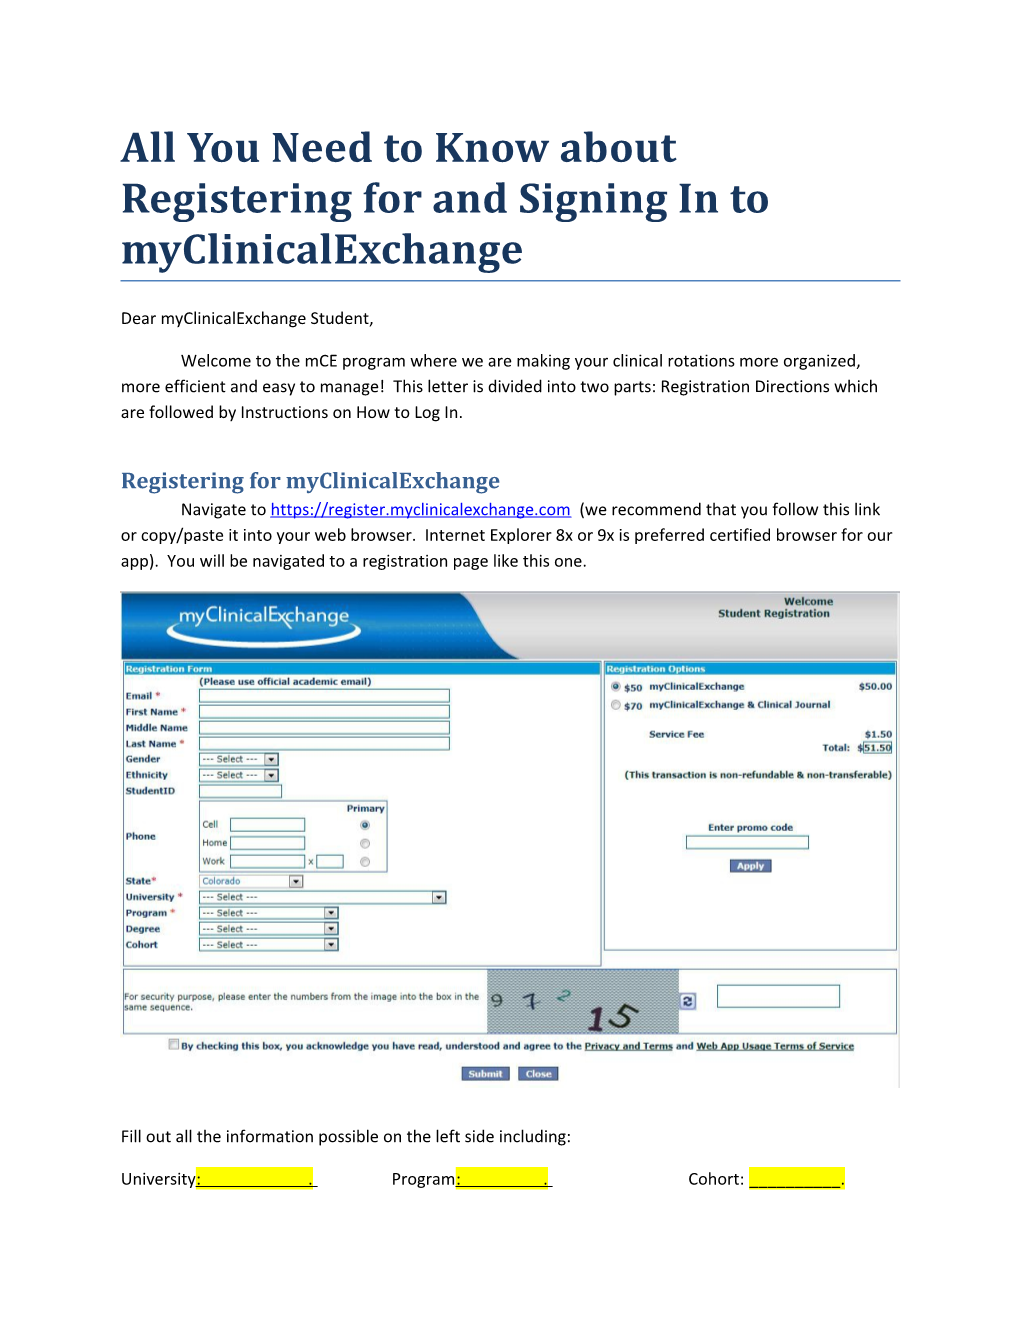 All You Need to Know About Registering for and Signing in to Myclinicalexchange